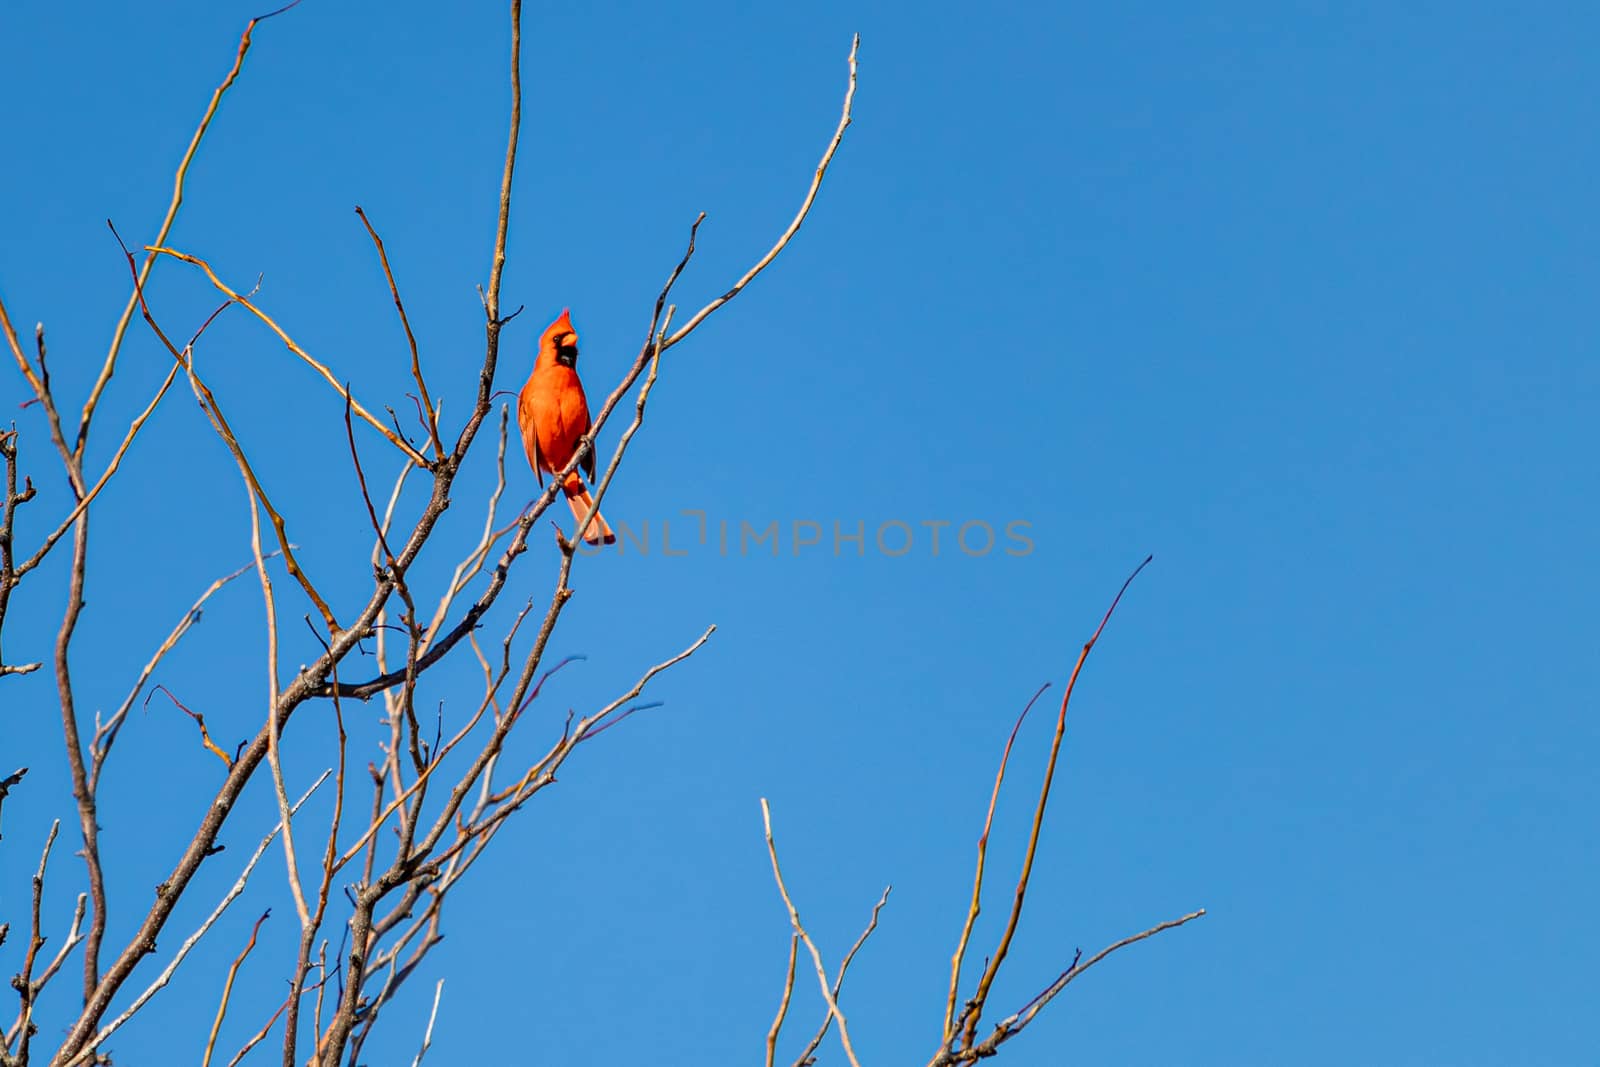 A northern cardinal, a male with vibrant red feathers, is perched on a high branch of a bare tree. Its plumage stands out against a clear blue sky.